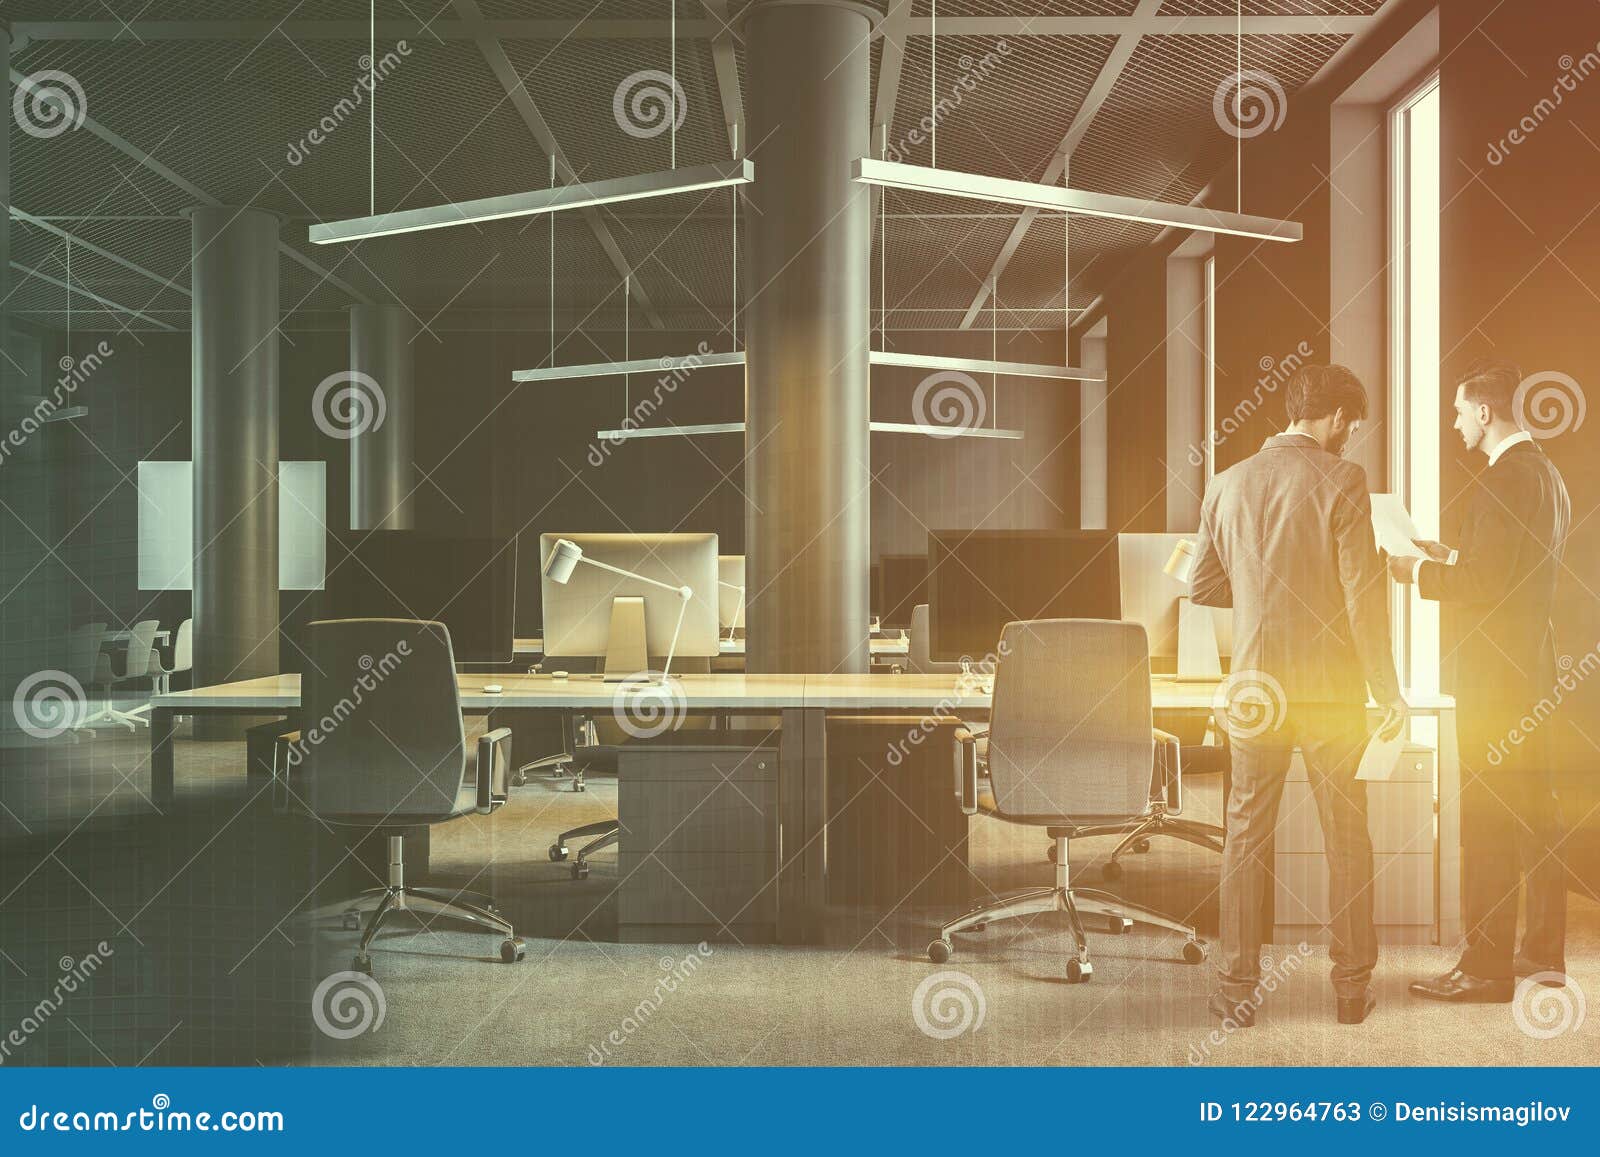 Industrial Style Brown Office Interior Businessmen Stock Image